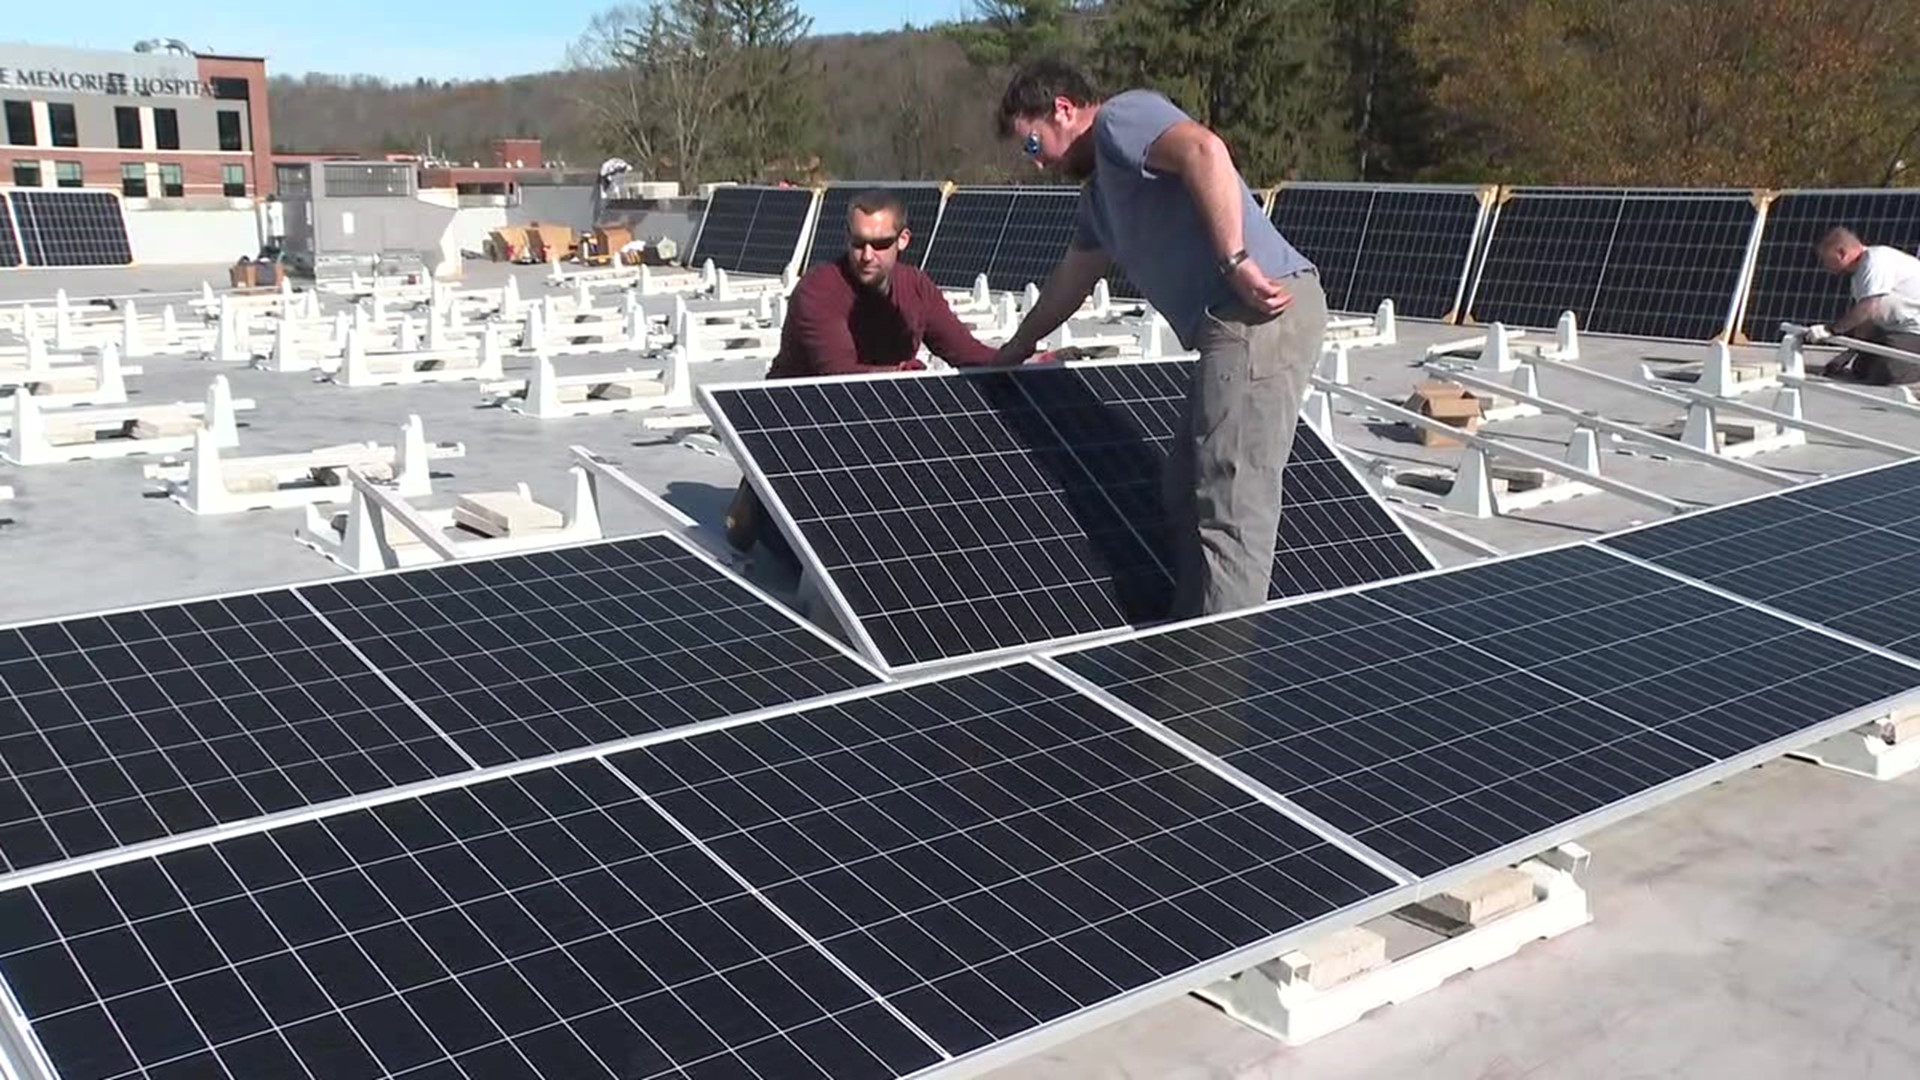 The hope is that solar energy will help power more innovative ideas at the Stourbridge Project in Honesdale.